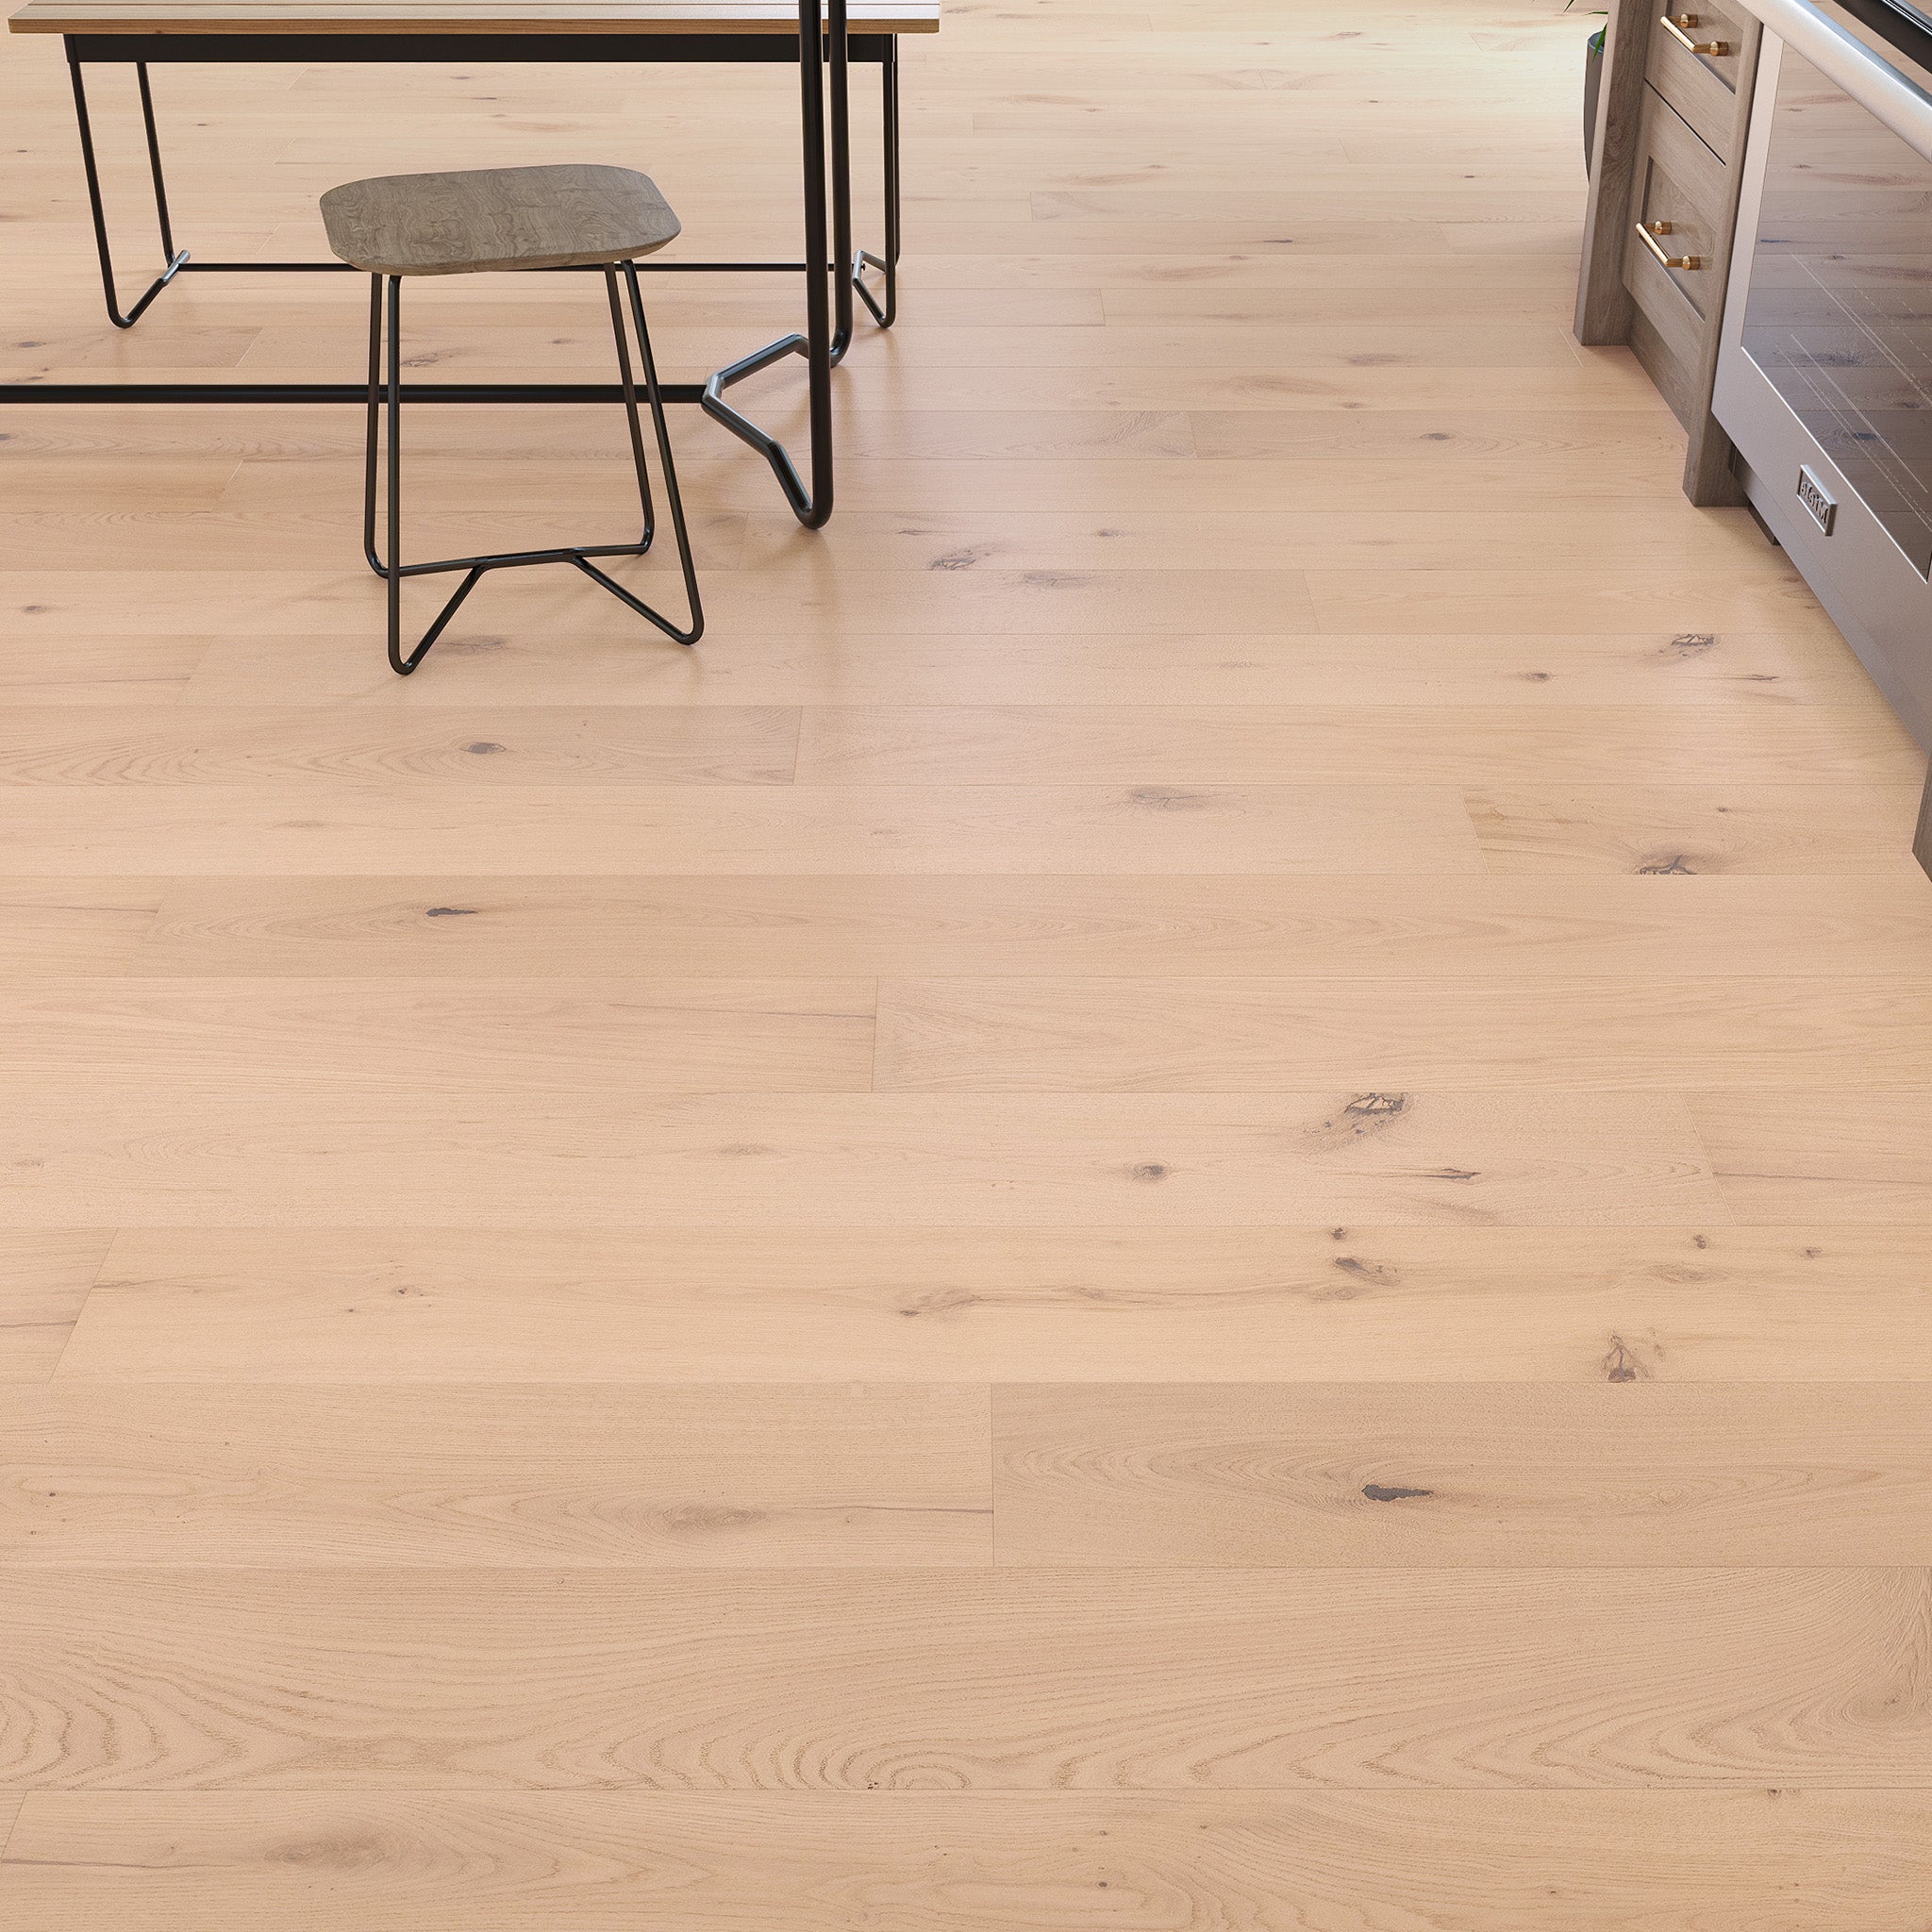 Magnolia Oak Invisible Smooth Lacquered 14/3 x 190mm Straight Engineered